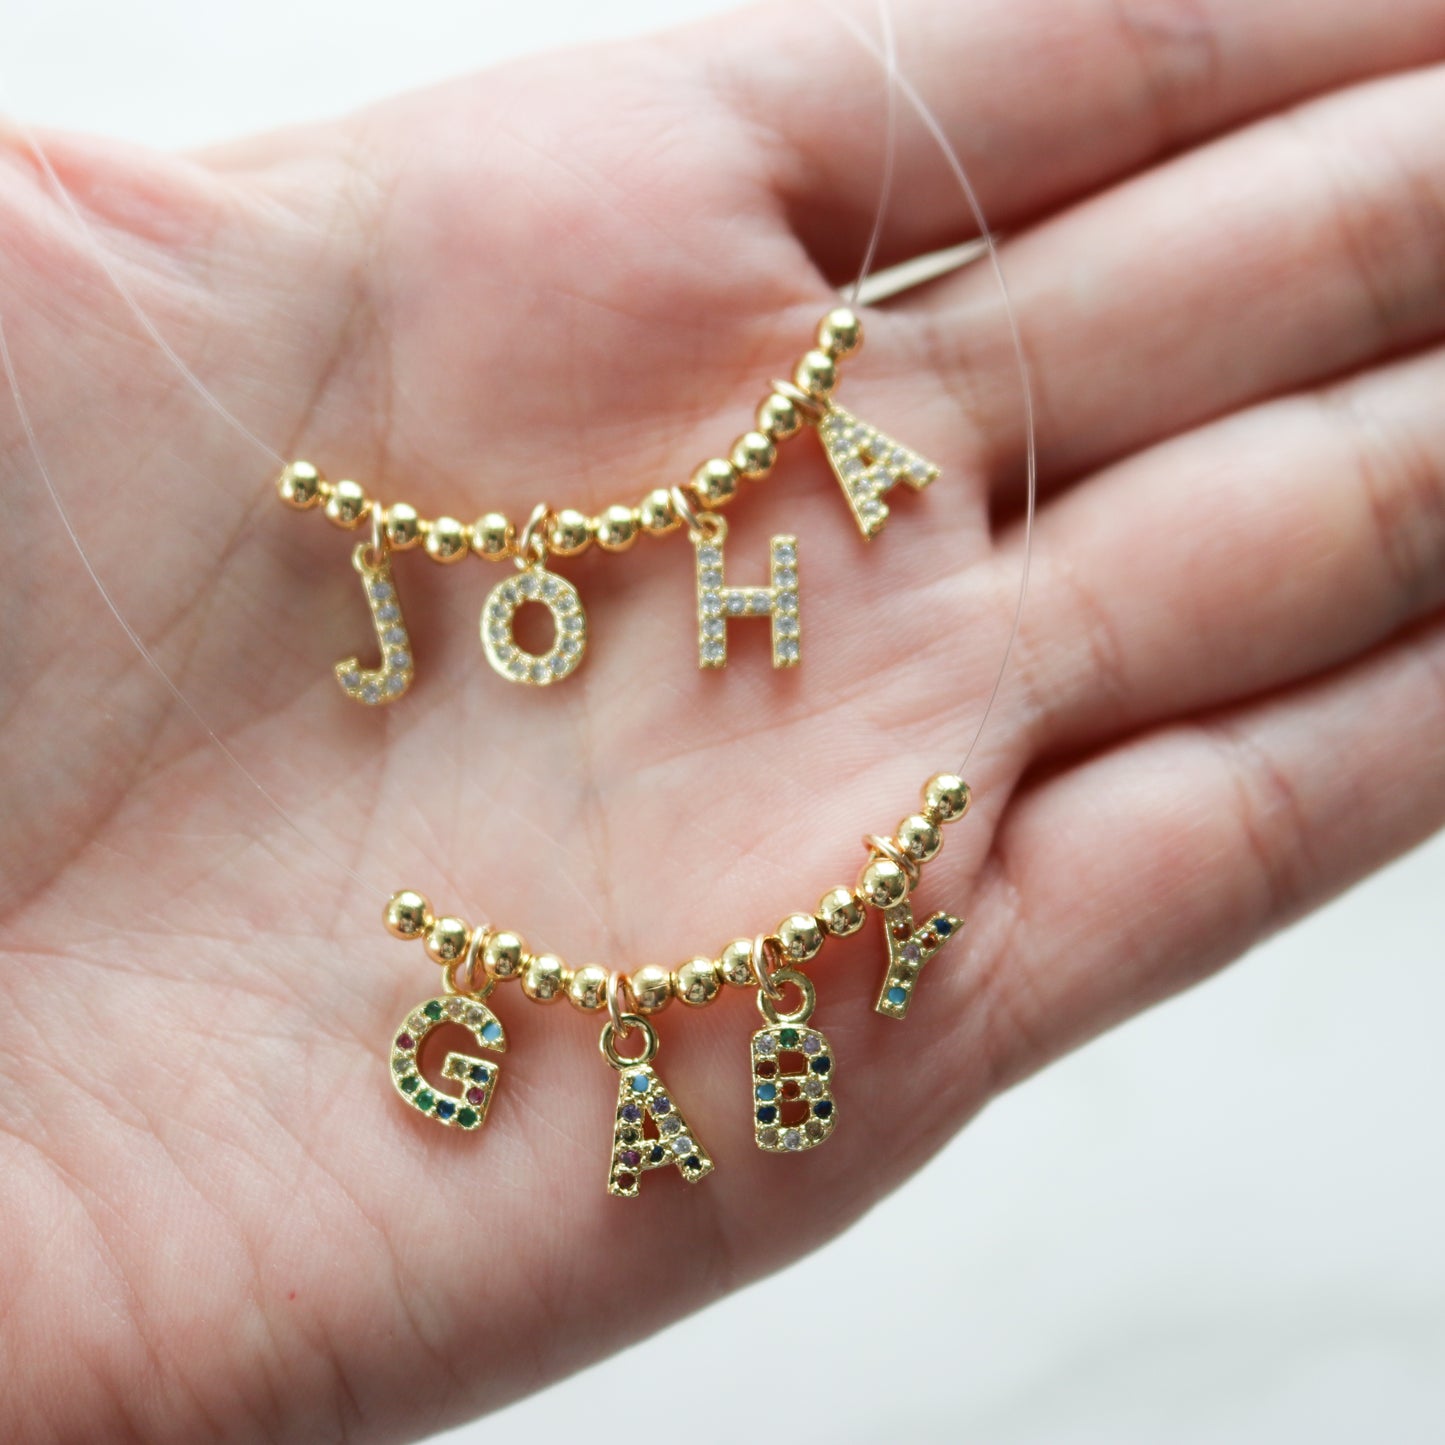 Personalized Invisible Necklace